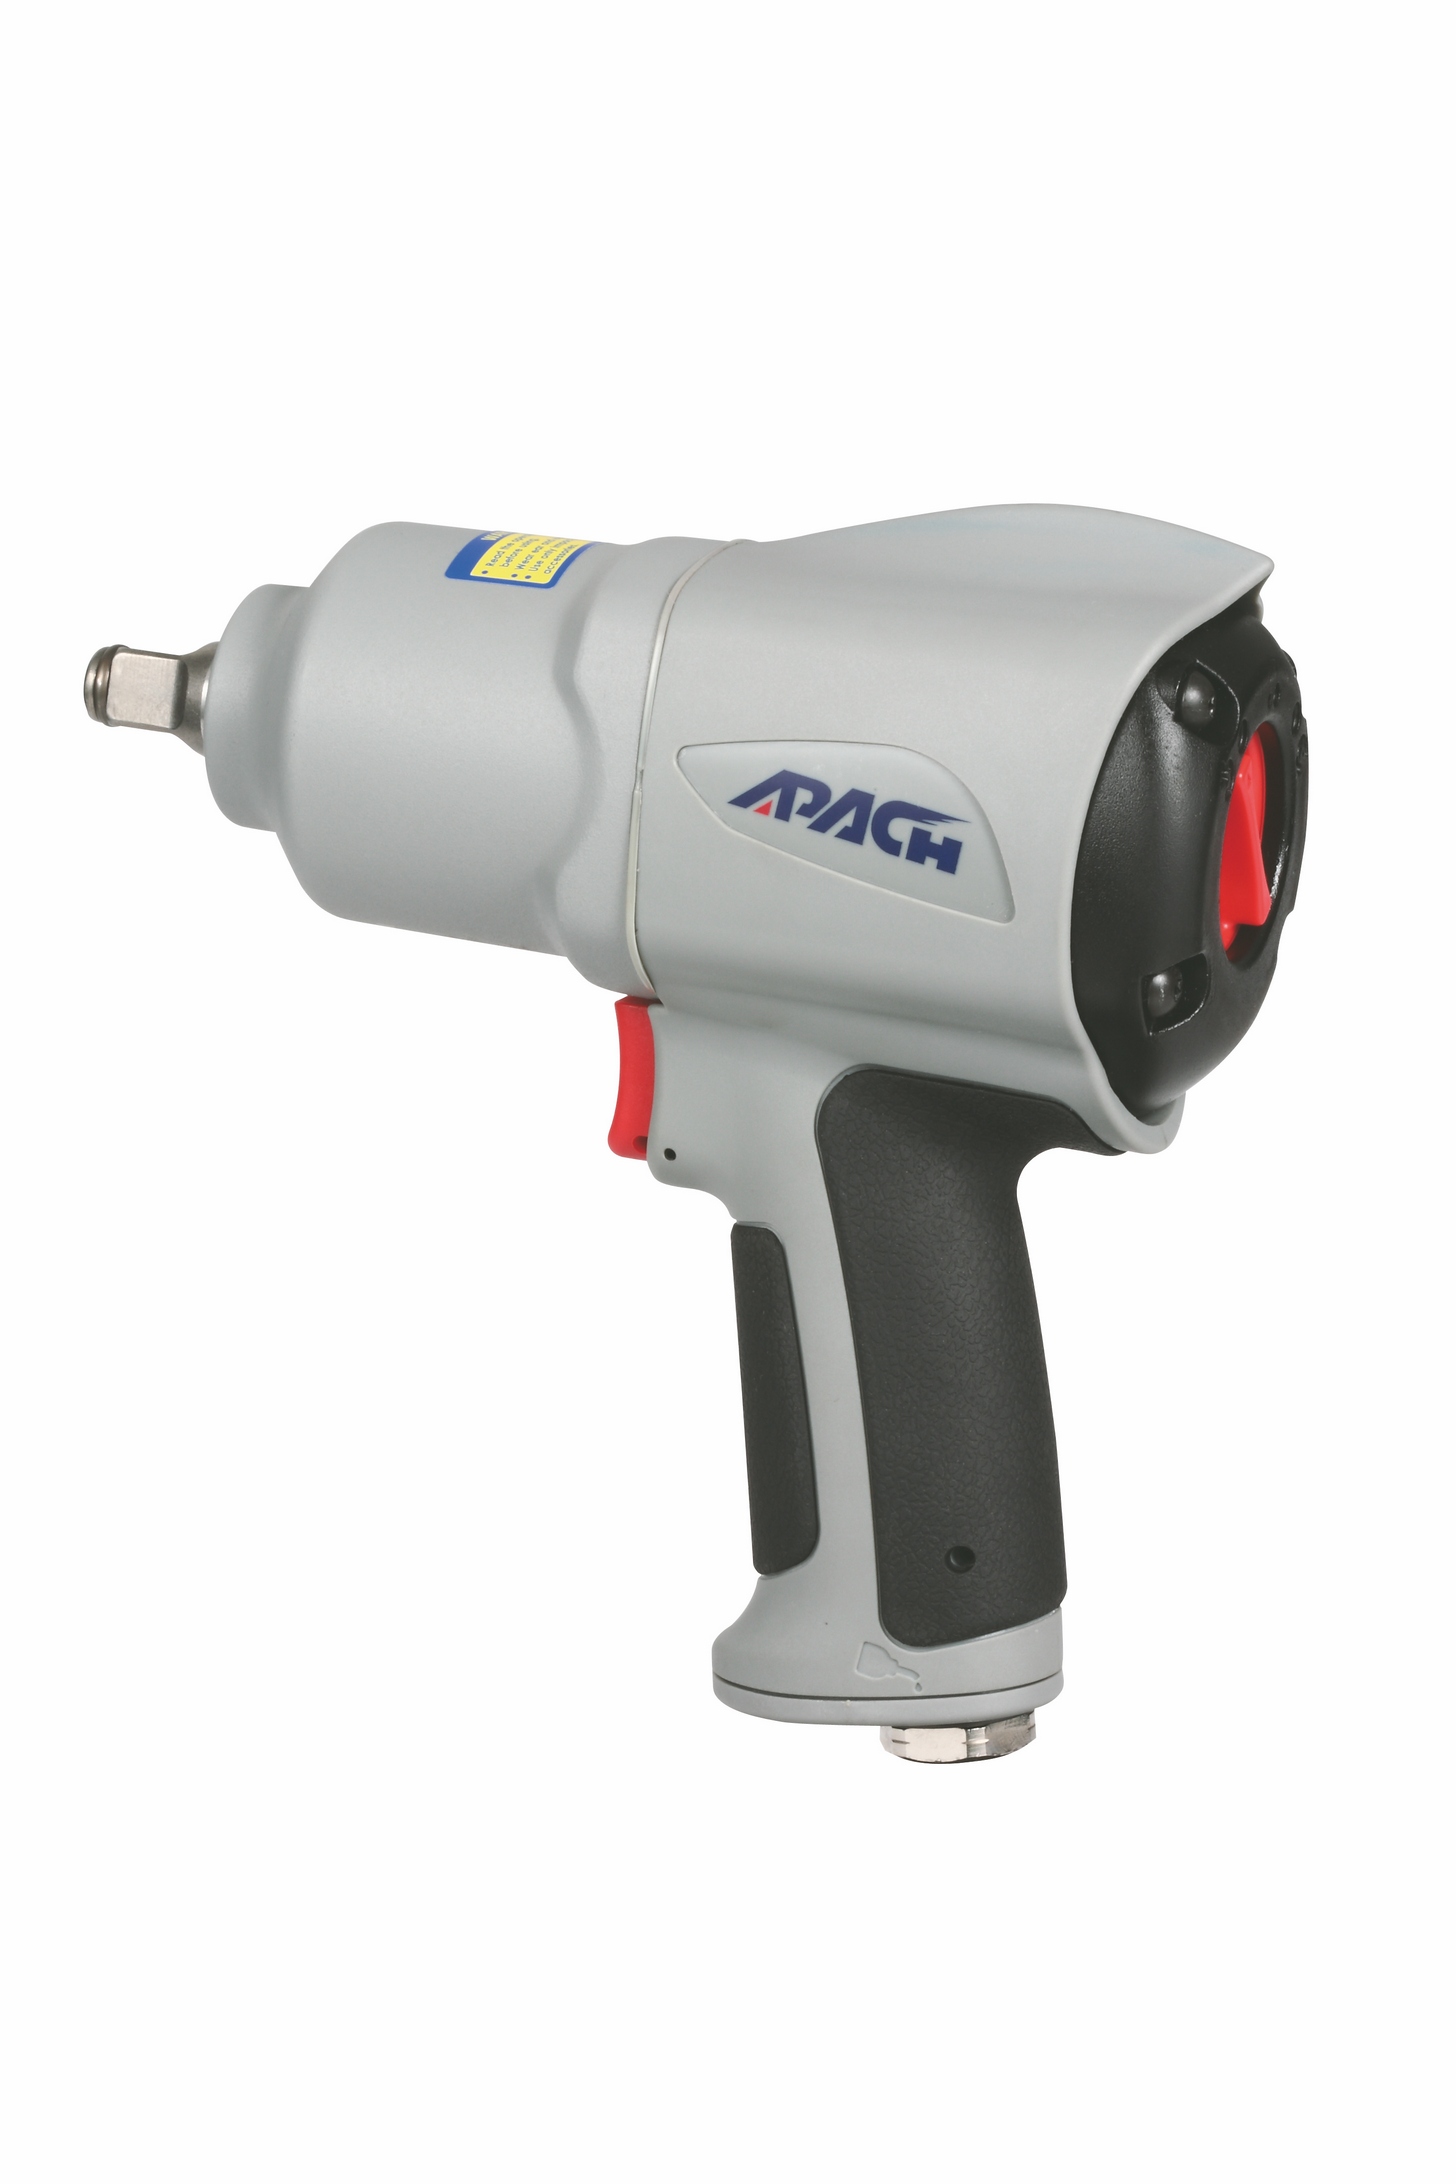 AW085C 1／2" Composite Air impact Wrench